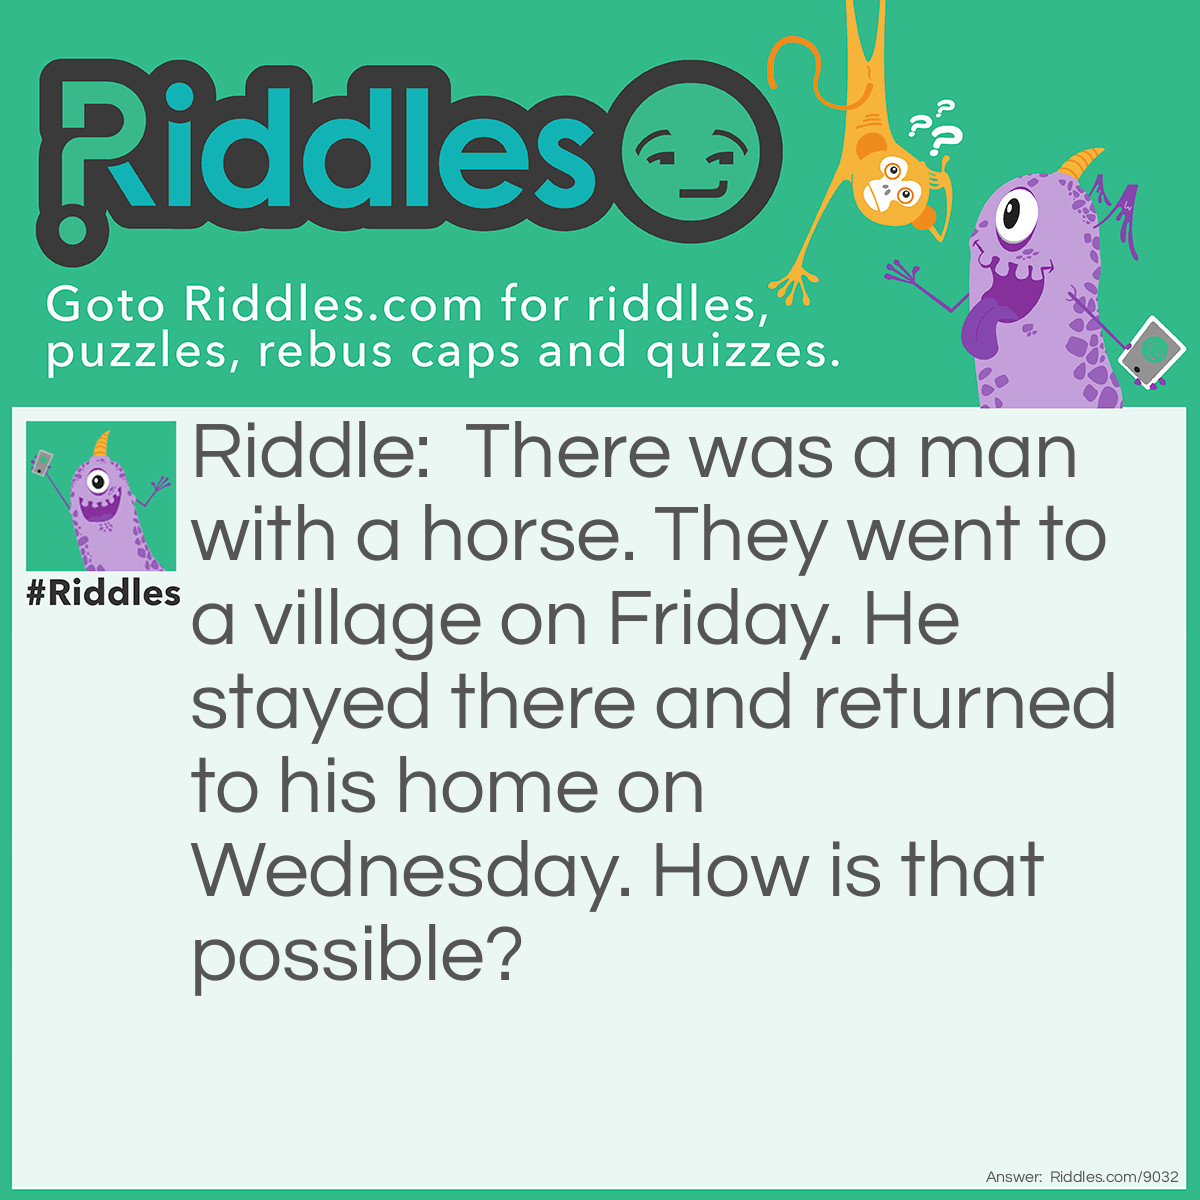 Riddle: There was a man with a horse. They went to a village on Friday. He stayed there and returned to his home on Wednesday. How is that possible? Answer: He went to the village on Friday which is the name of his horse. He went there on Friday but the day he came there was actually Monday.